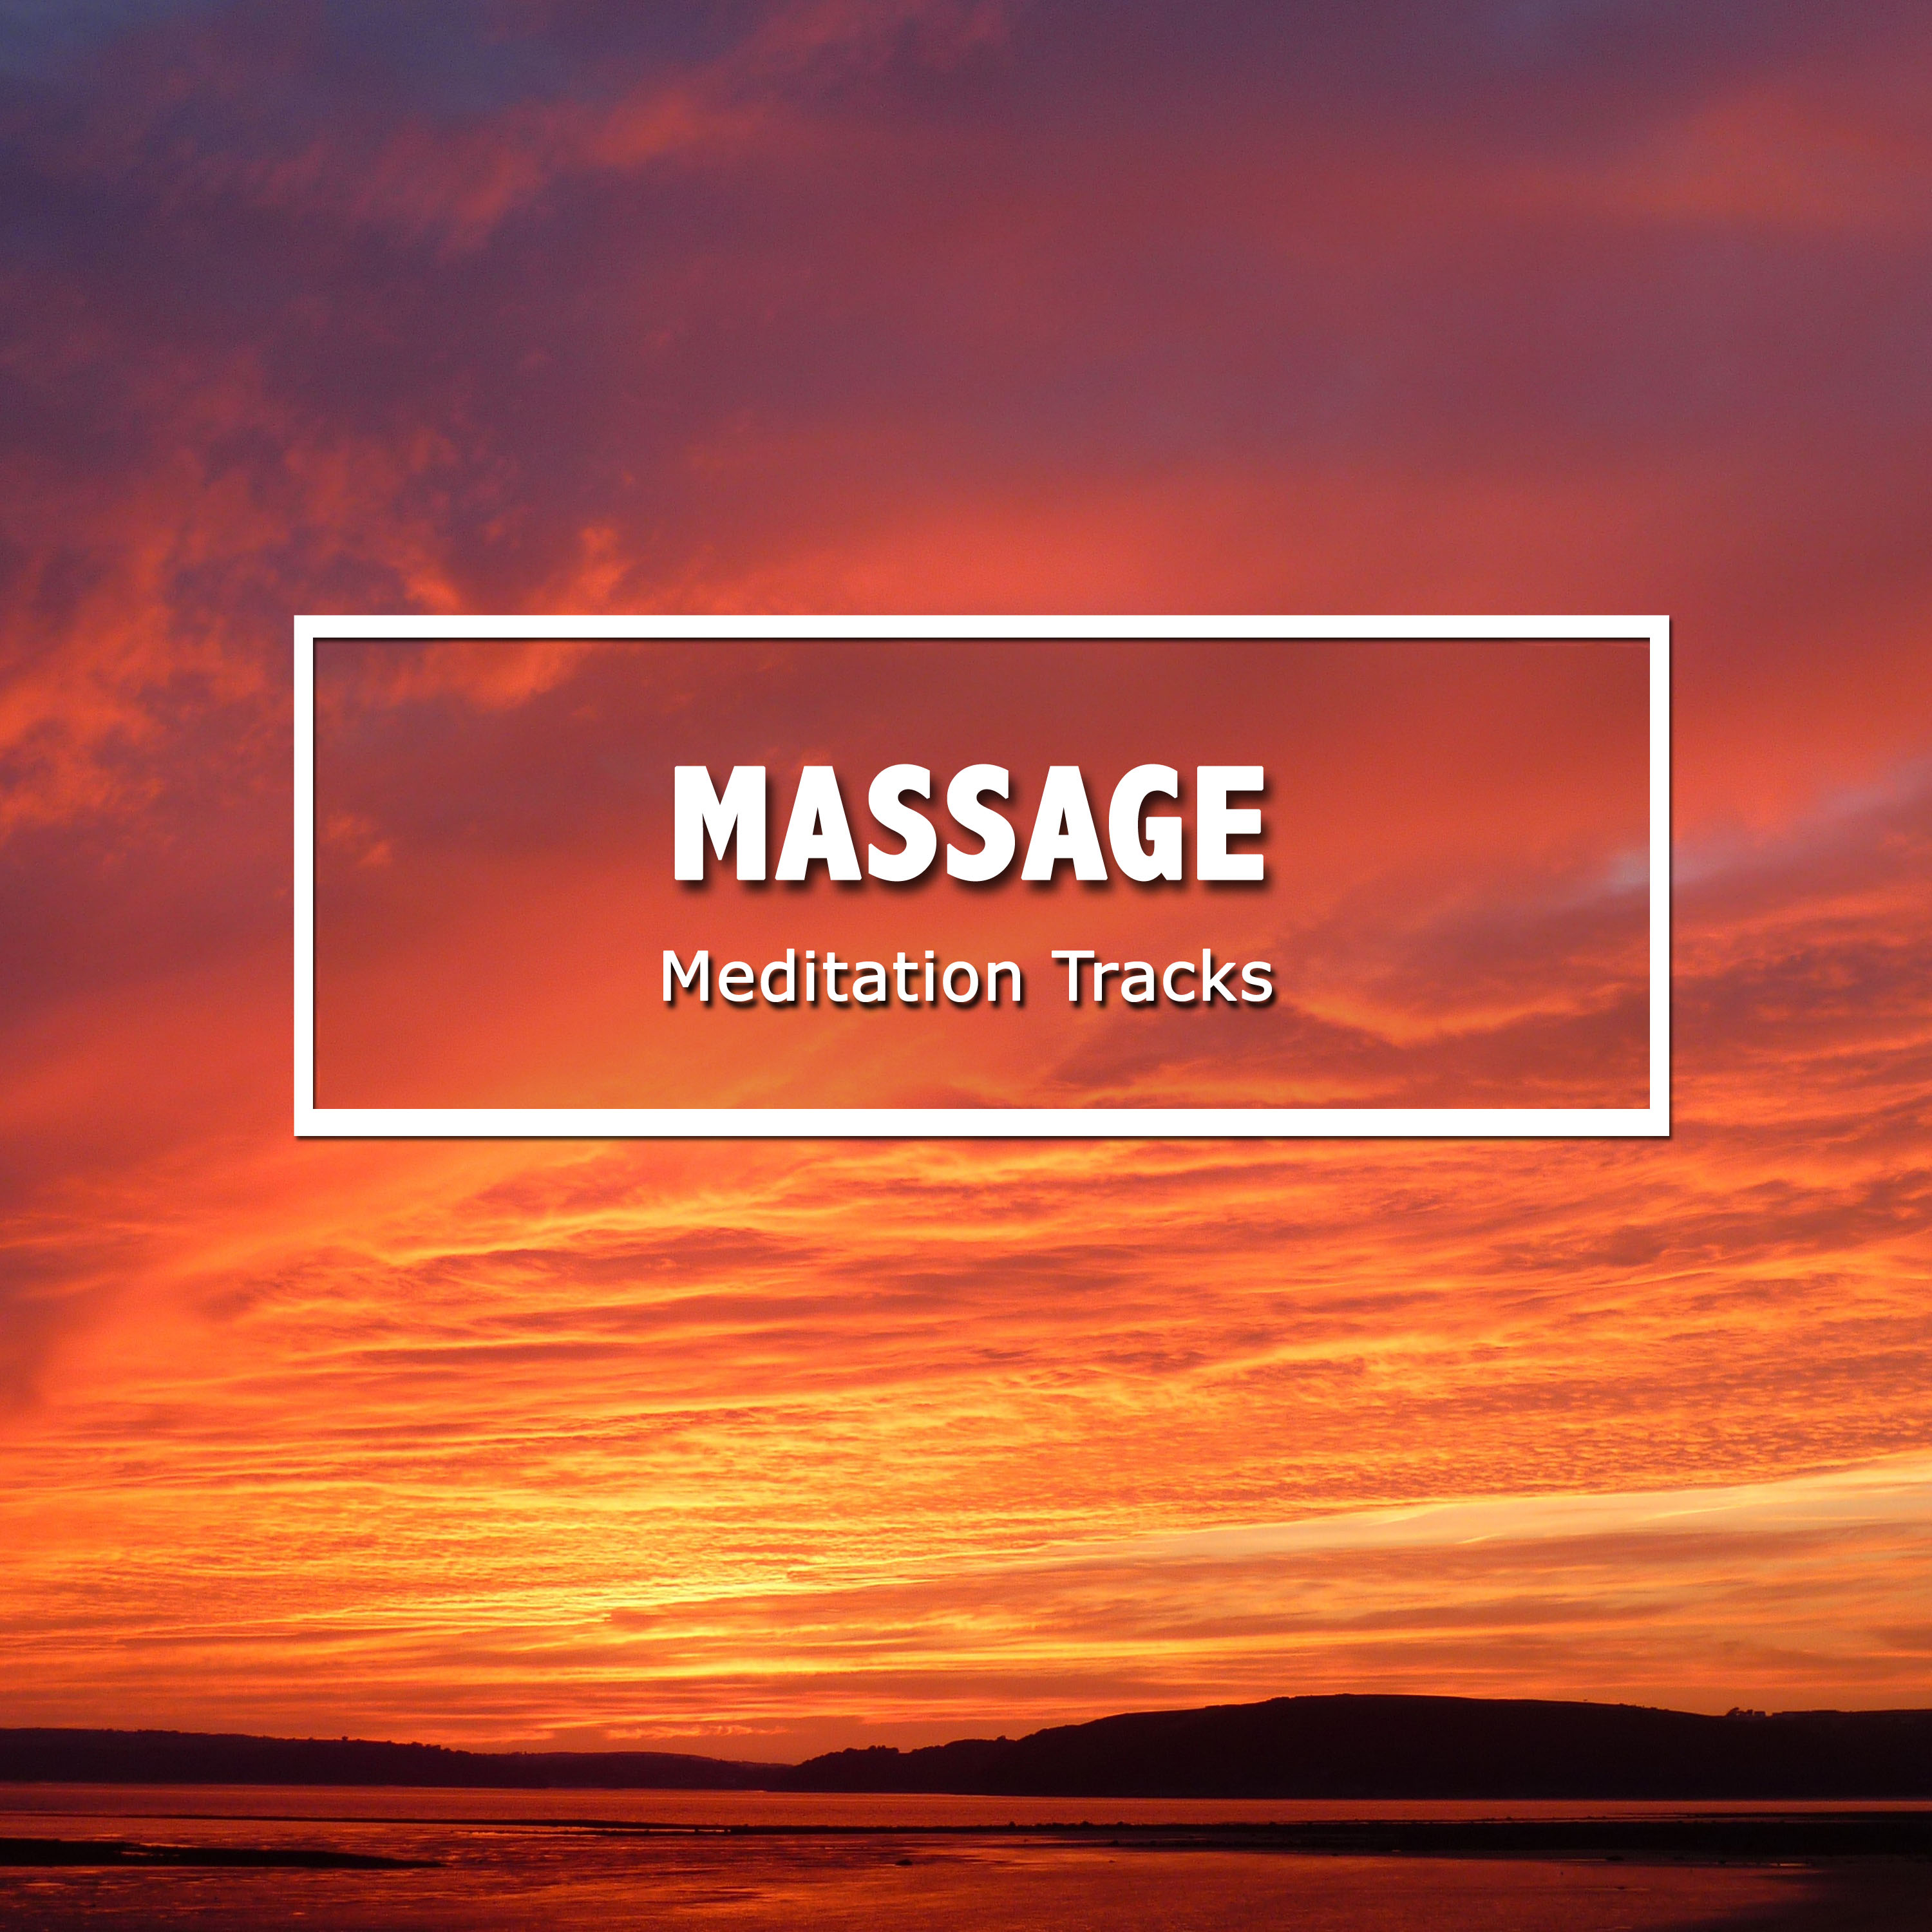 15 Relaxing Massage and Meditation Tracks